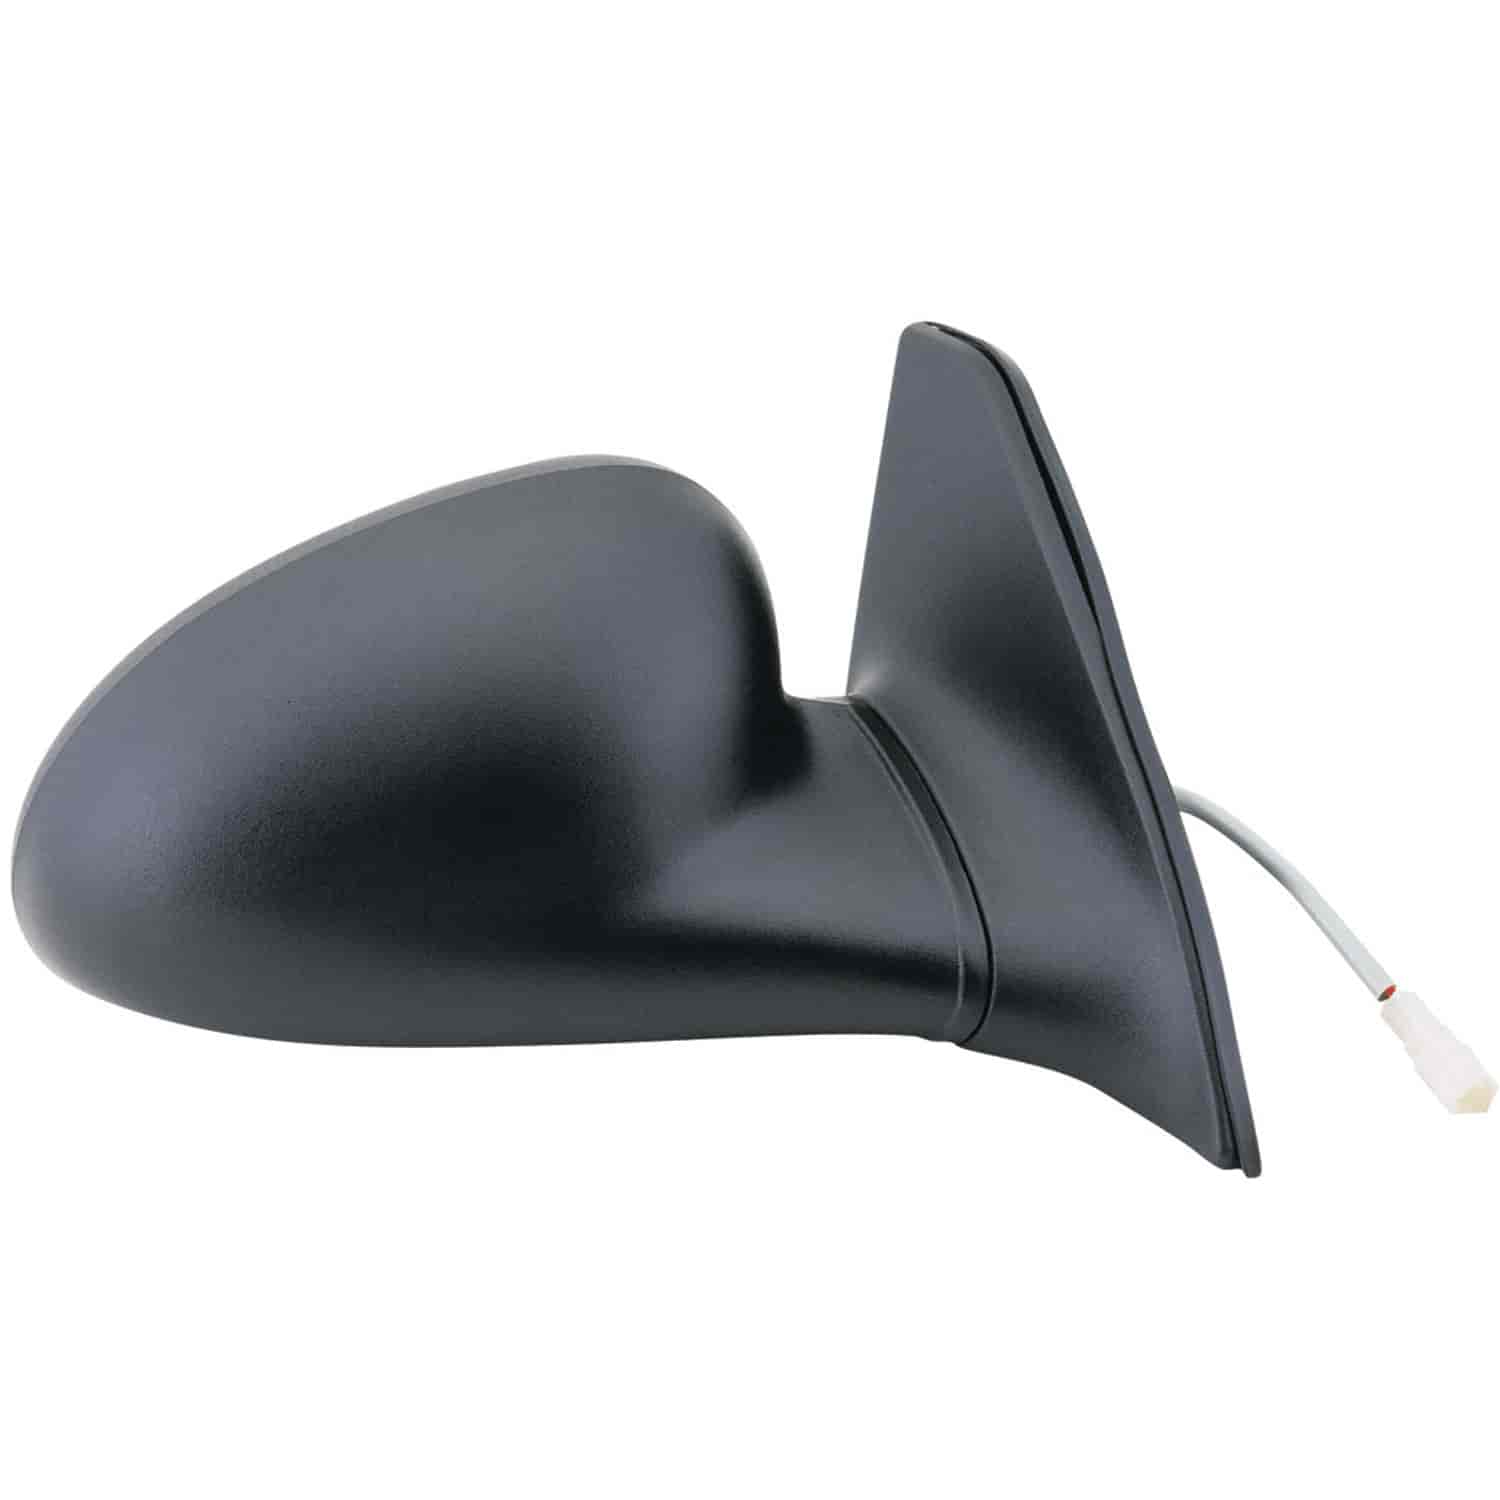 OEM Style Replacement mirror for 97-02 Ford Escort